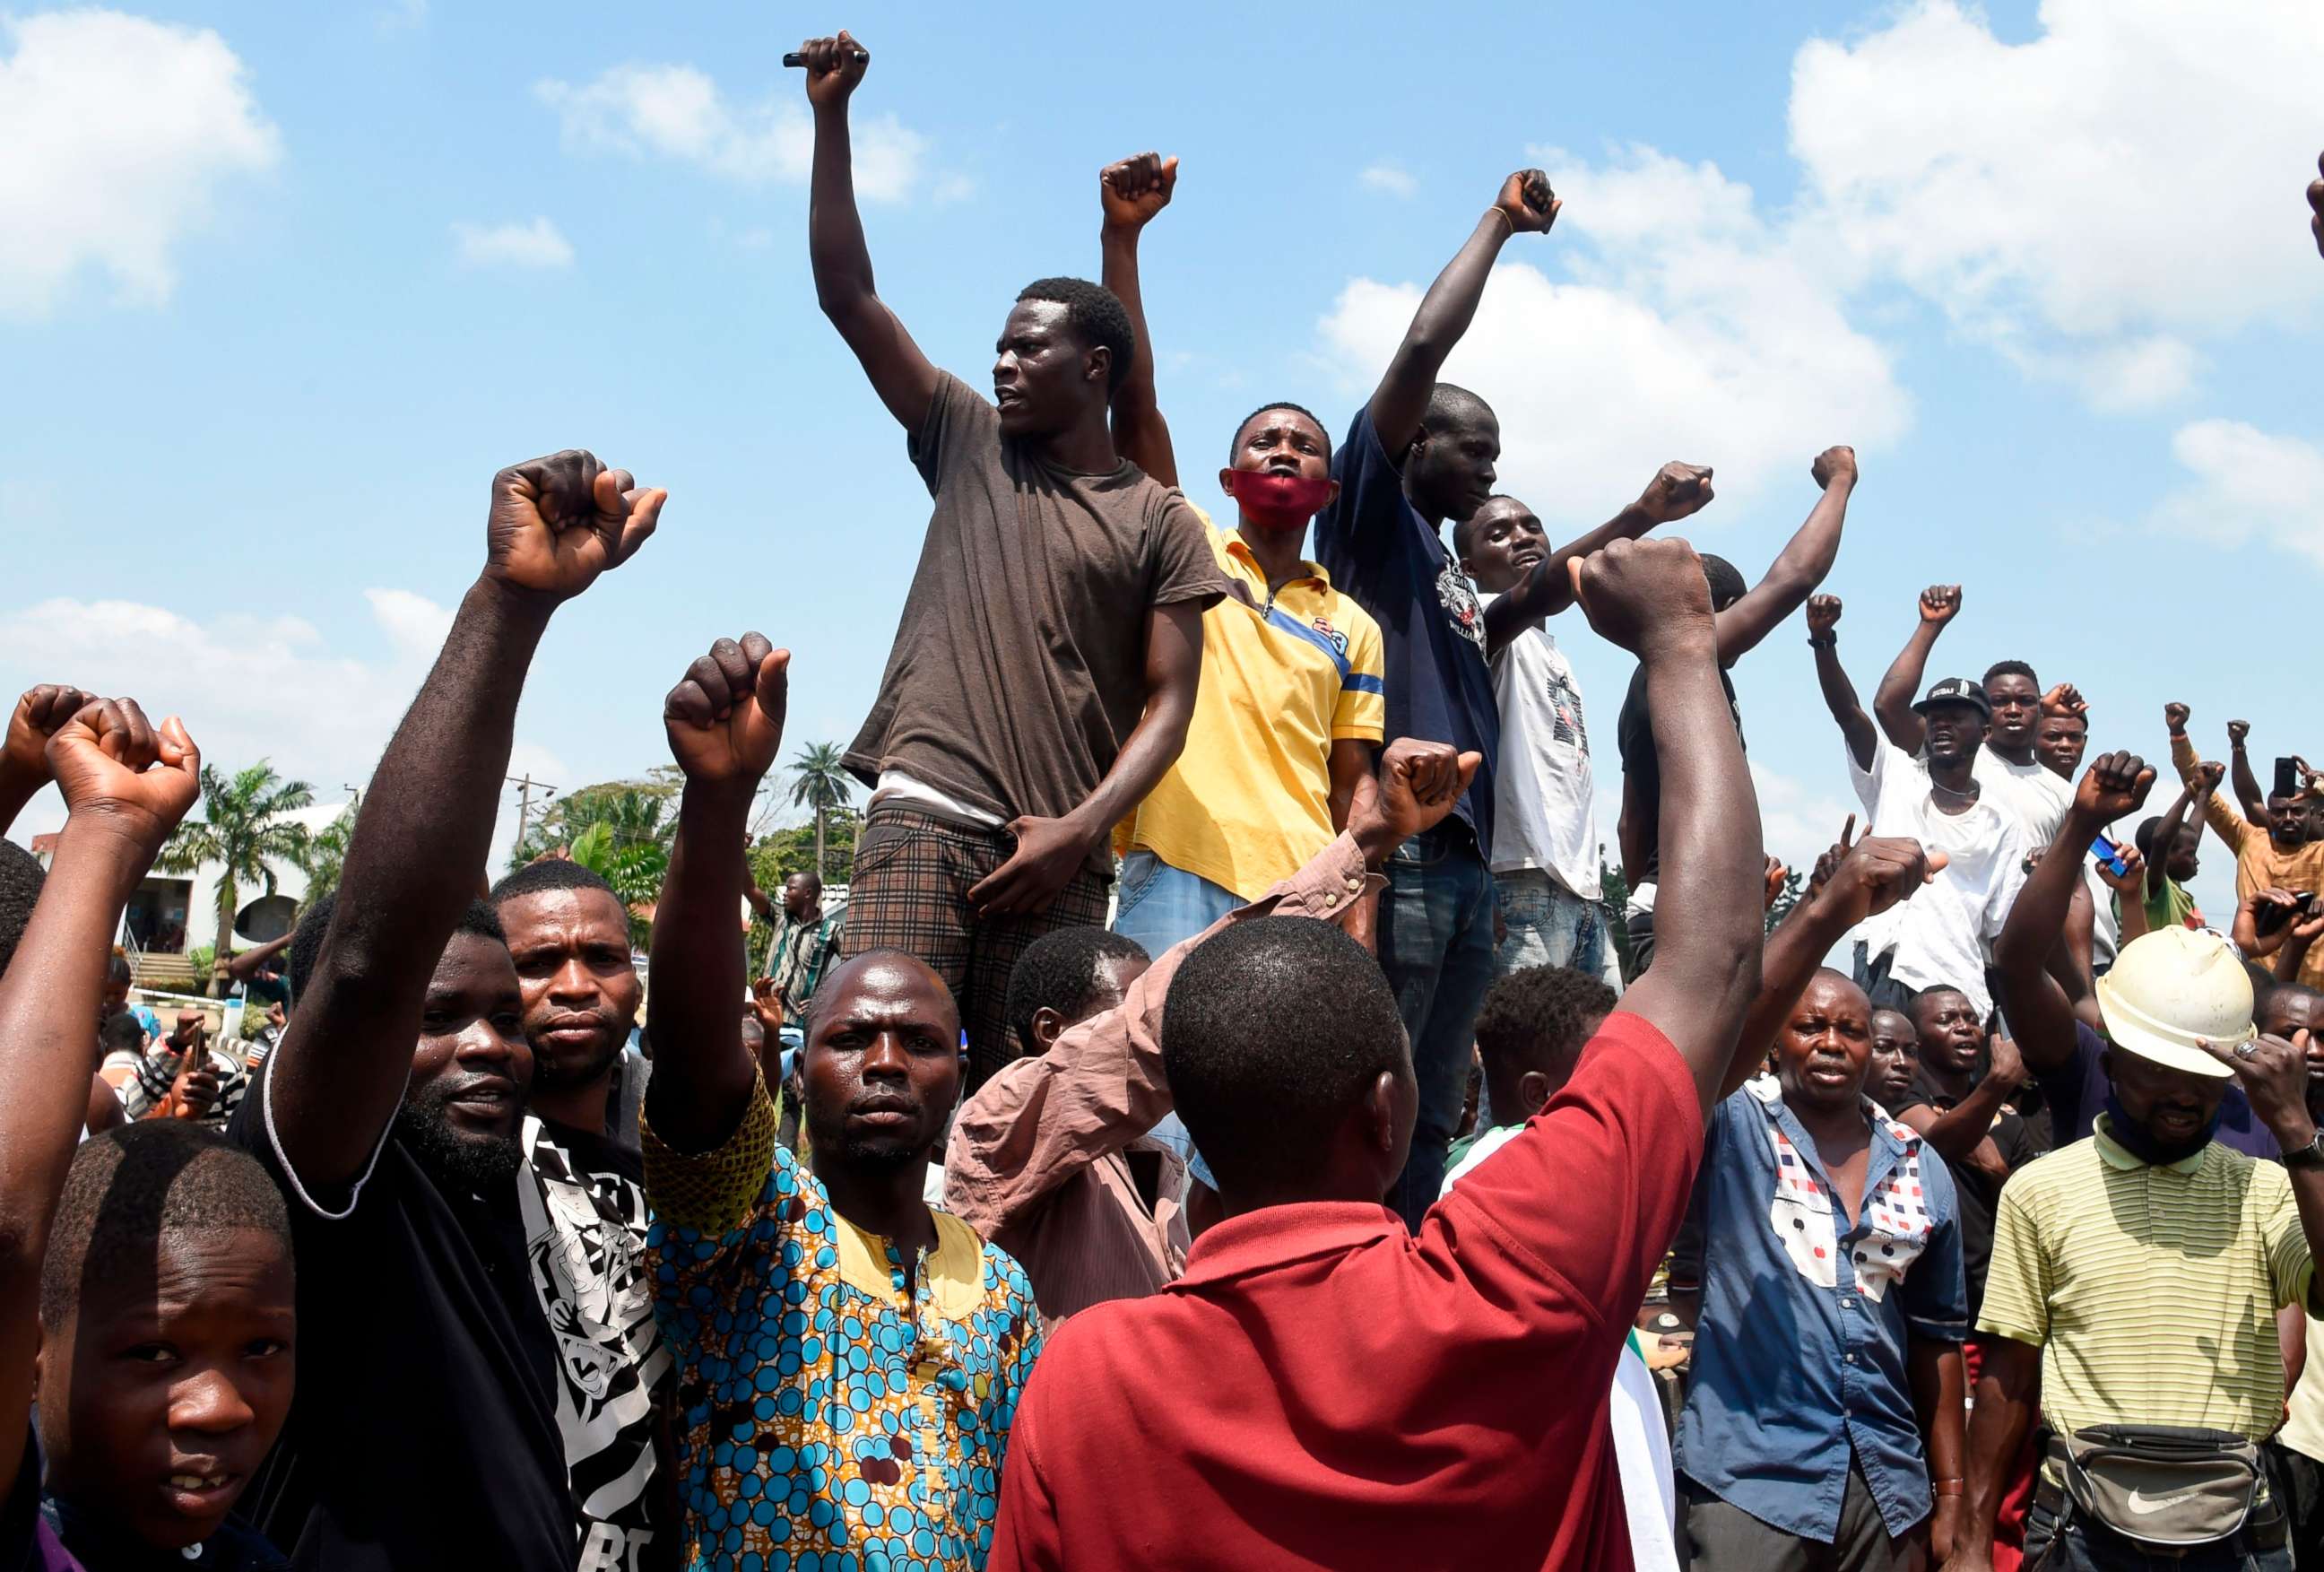 PHOTO: Protesters chant and sing solidarity songs as they barricade barricade the Lagos-Ibadan expressway to protest against police brutality and the killing of protesters by the military, at Magboro, Ogun State, on Oct. 21, 2020.